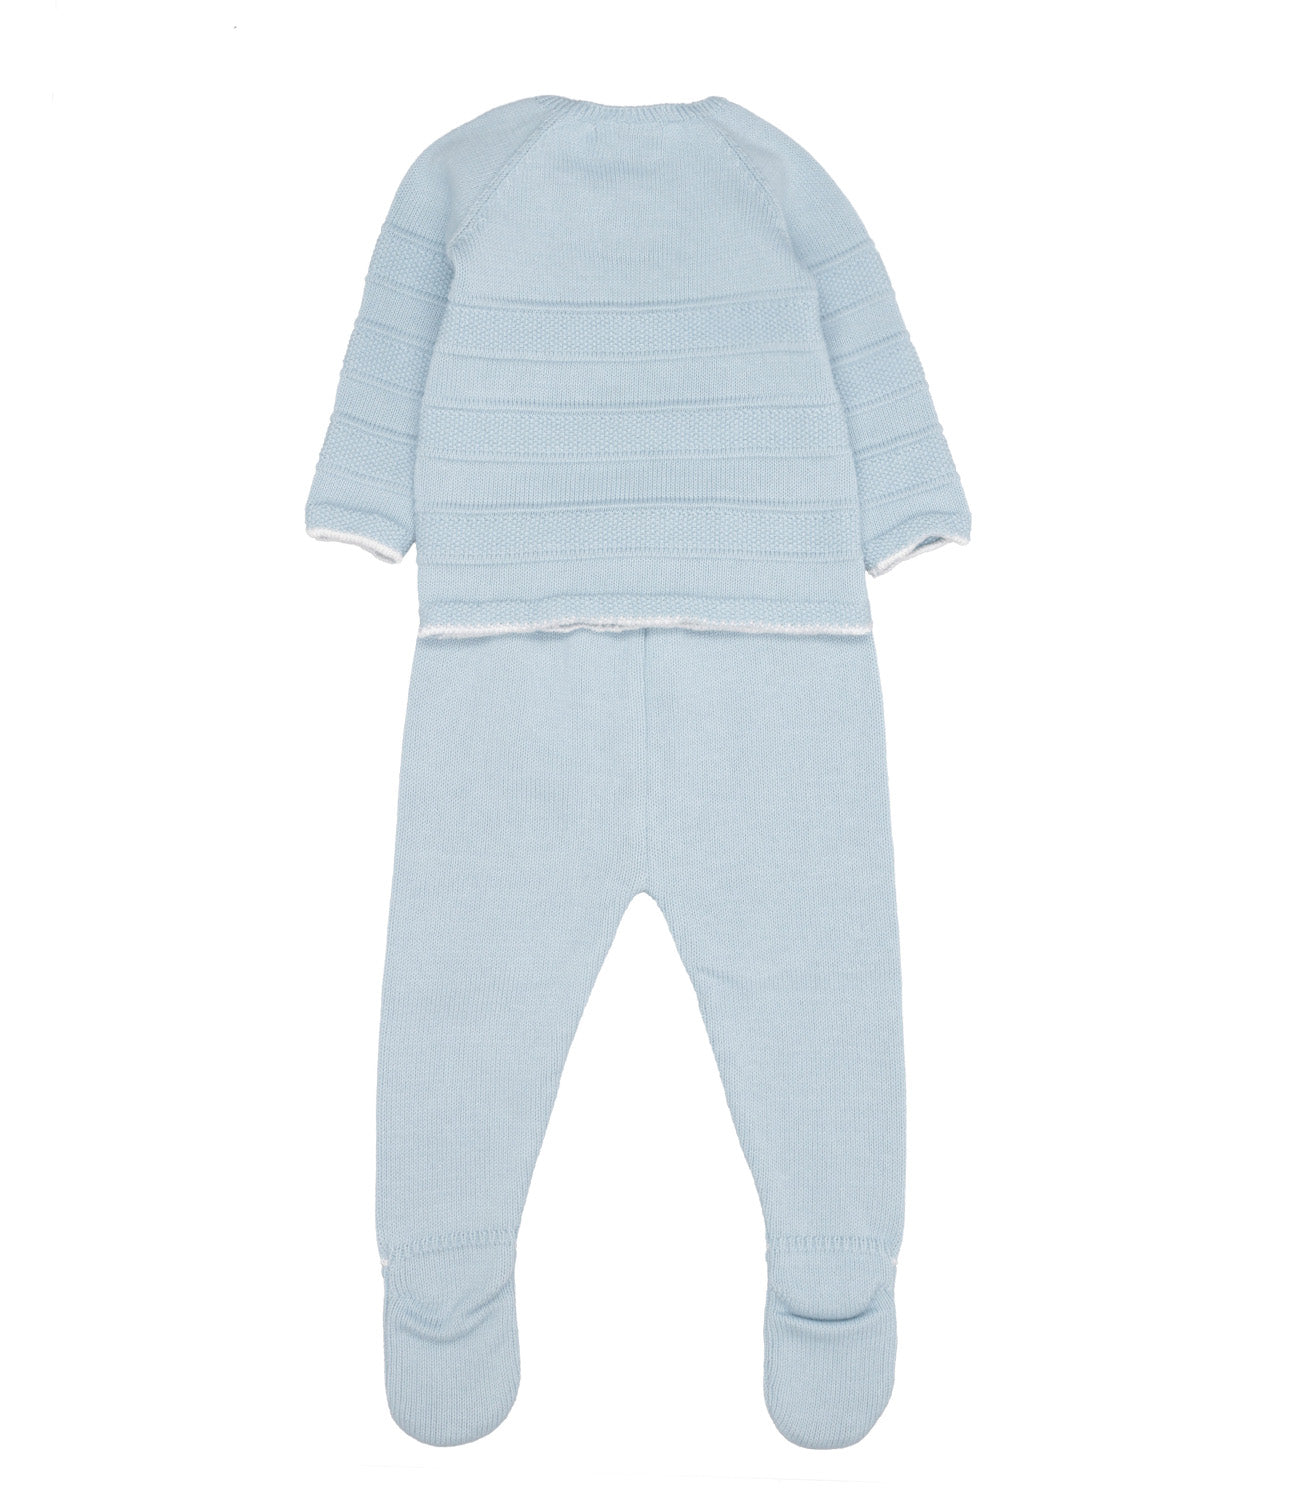 Paz Rodriguez | Sea Blue and White Lia Sweater and Pant Set